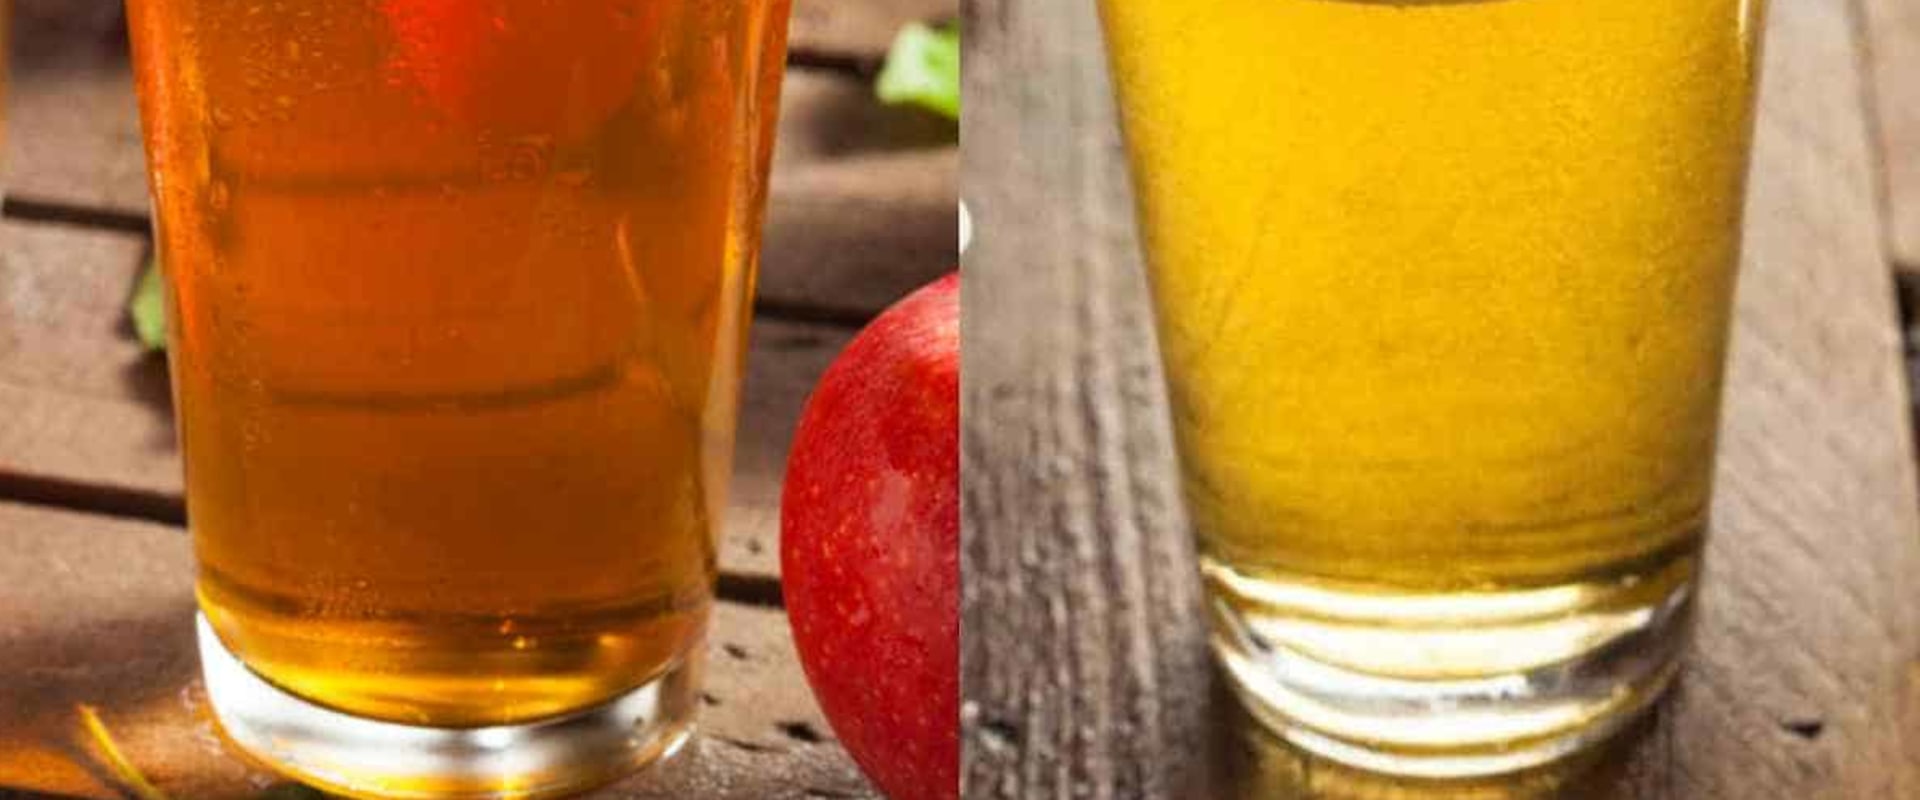 Are ciders healthier than beer?